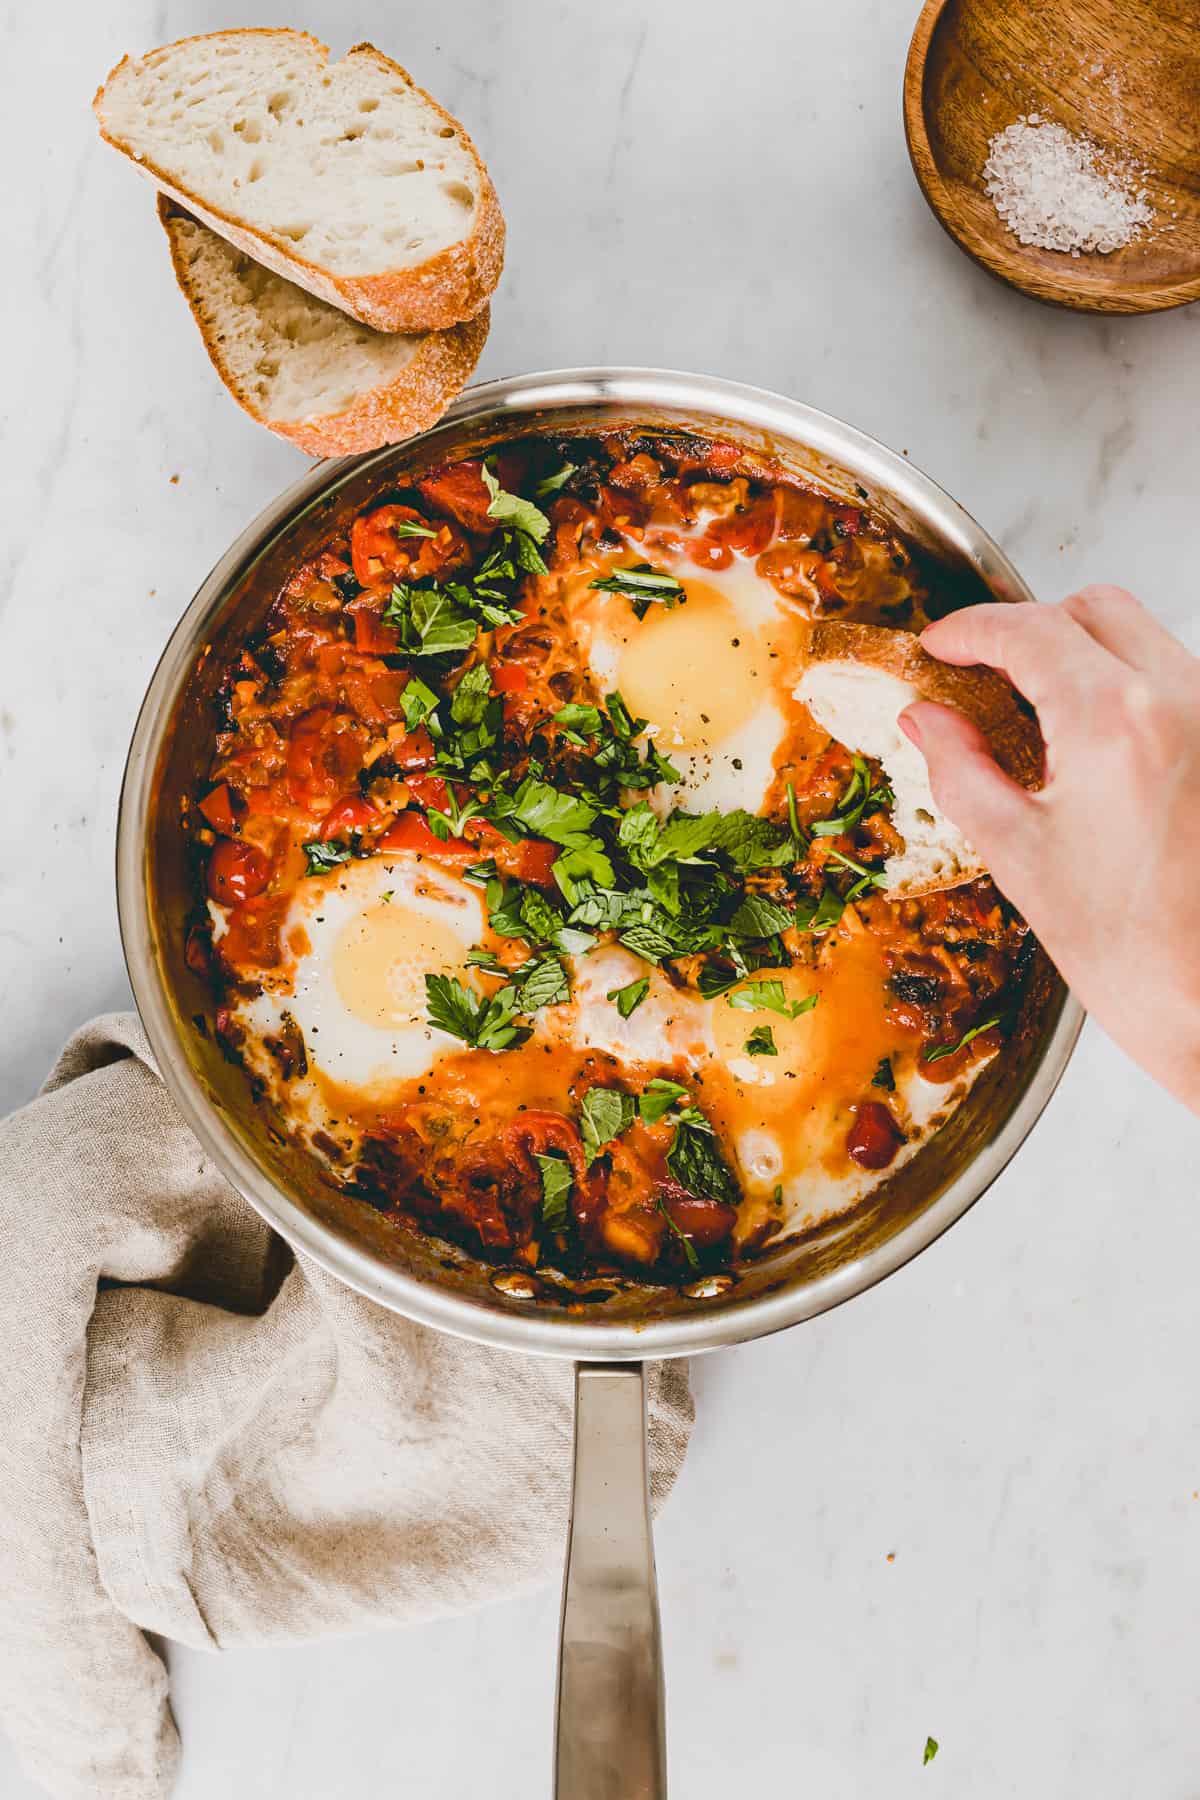 a hand dipping a bread into a skillet of homemade shakshuka